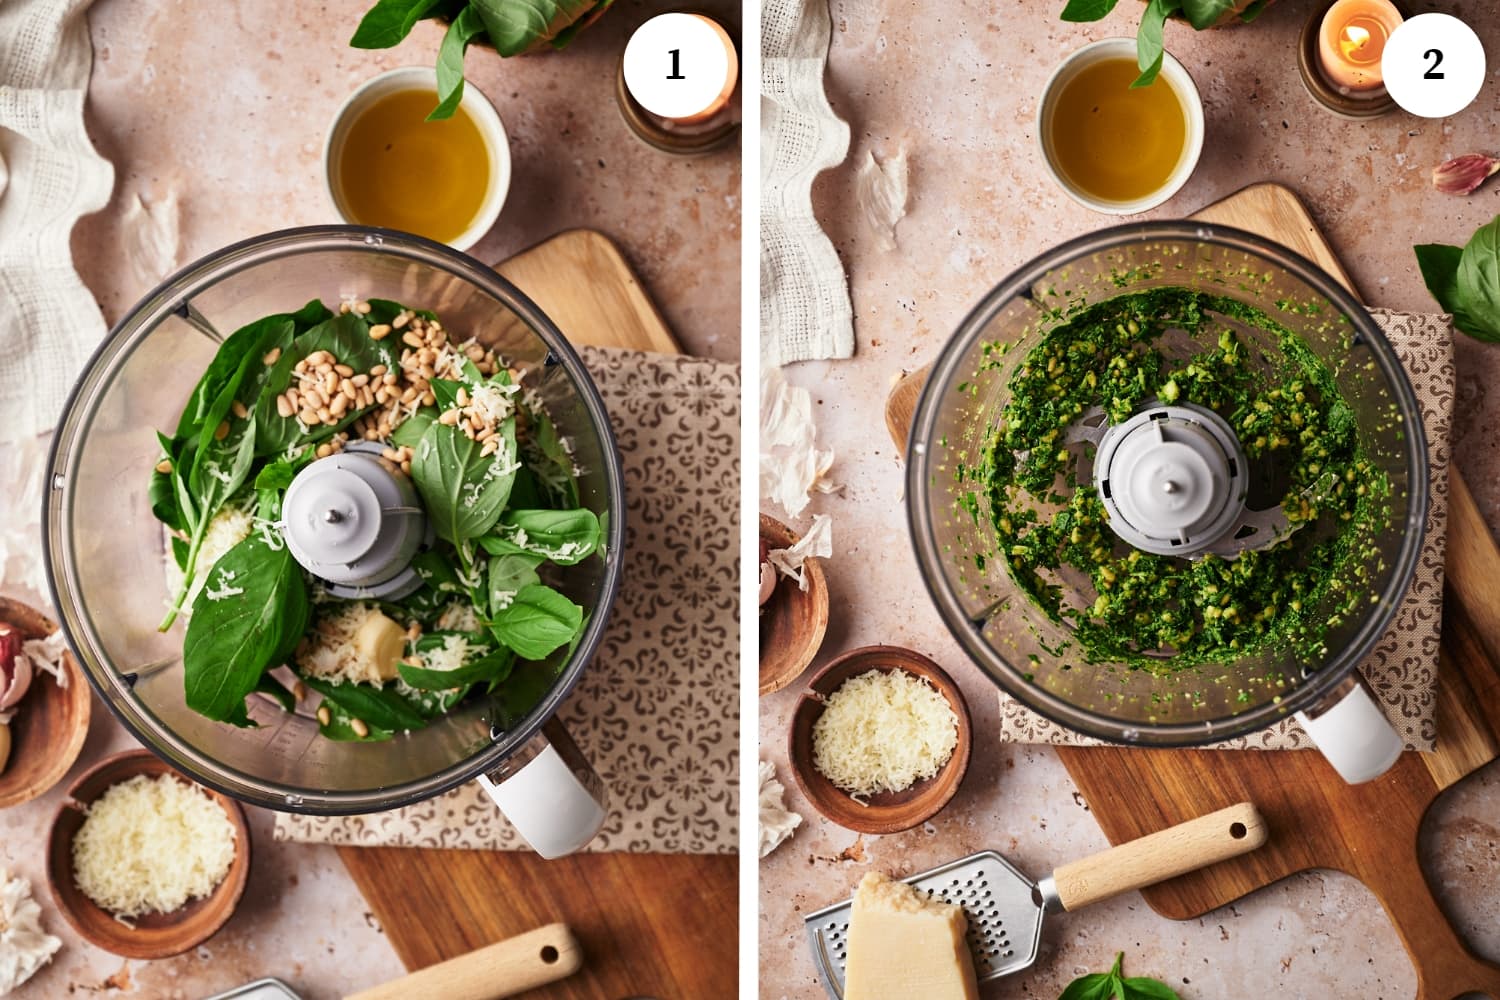 pesto procedure: first photo, a food processor with basil, garlic cloves, pine nuts, and parmesan cheese inside. around it are a bowls of cheese, olive oil, garlic cloves. second photo, same picture but the ingredients inside the food processor are ground.